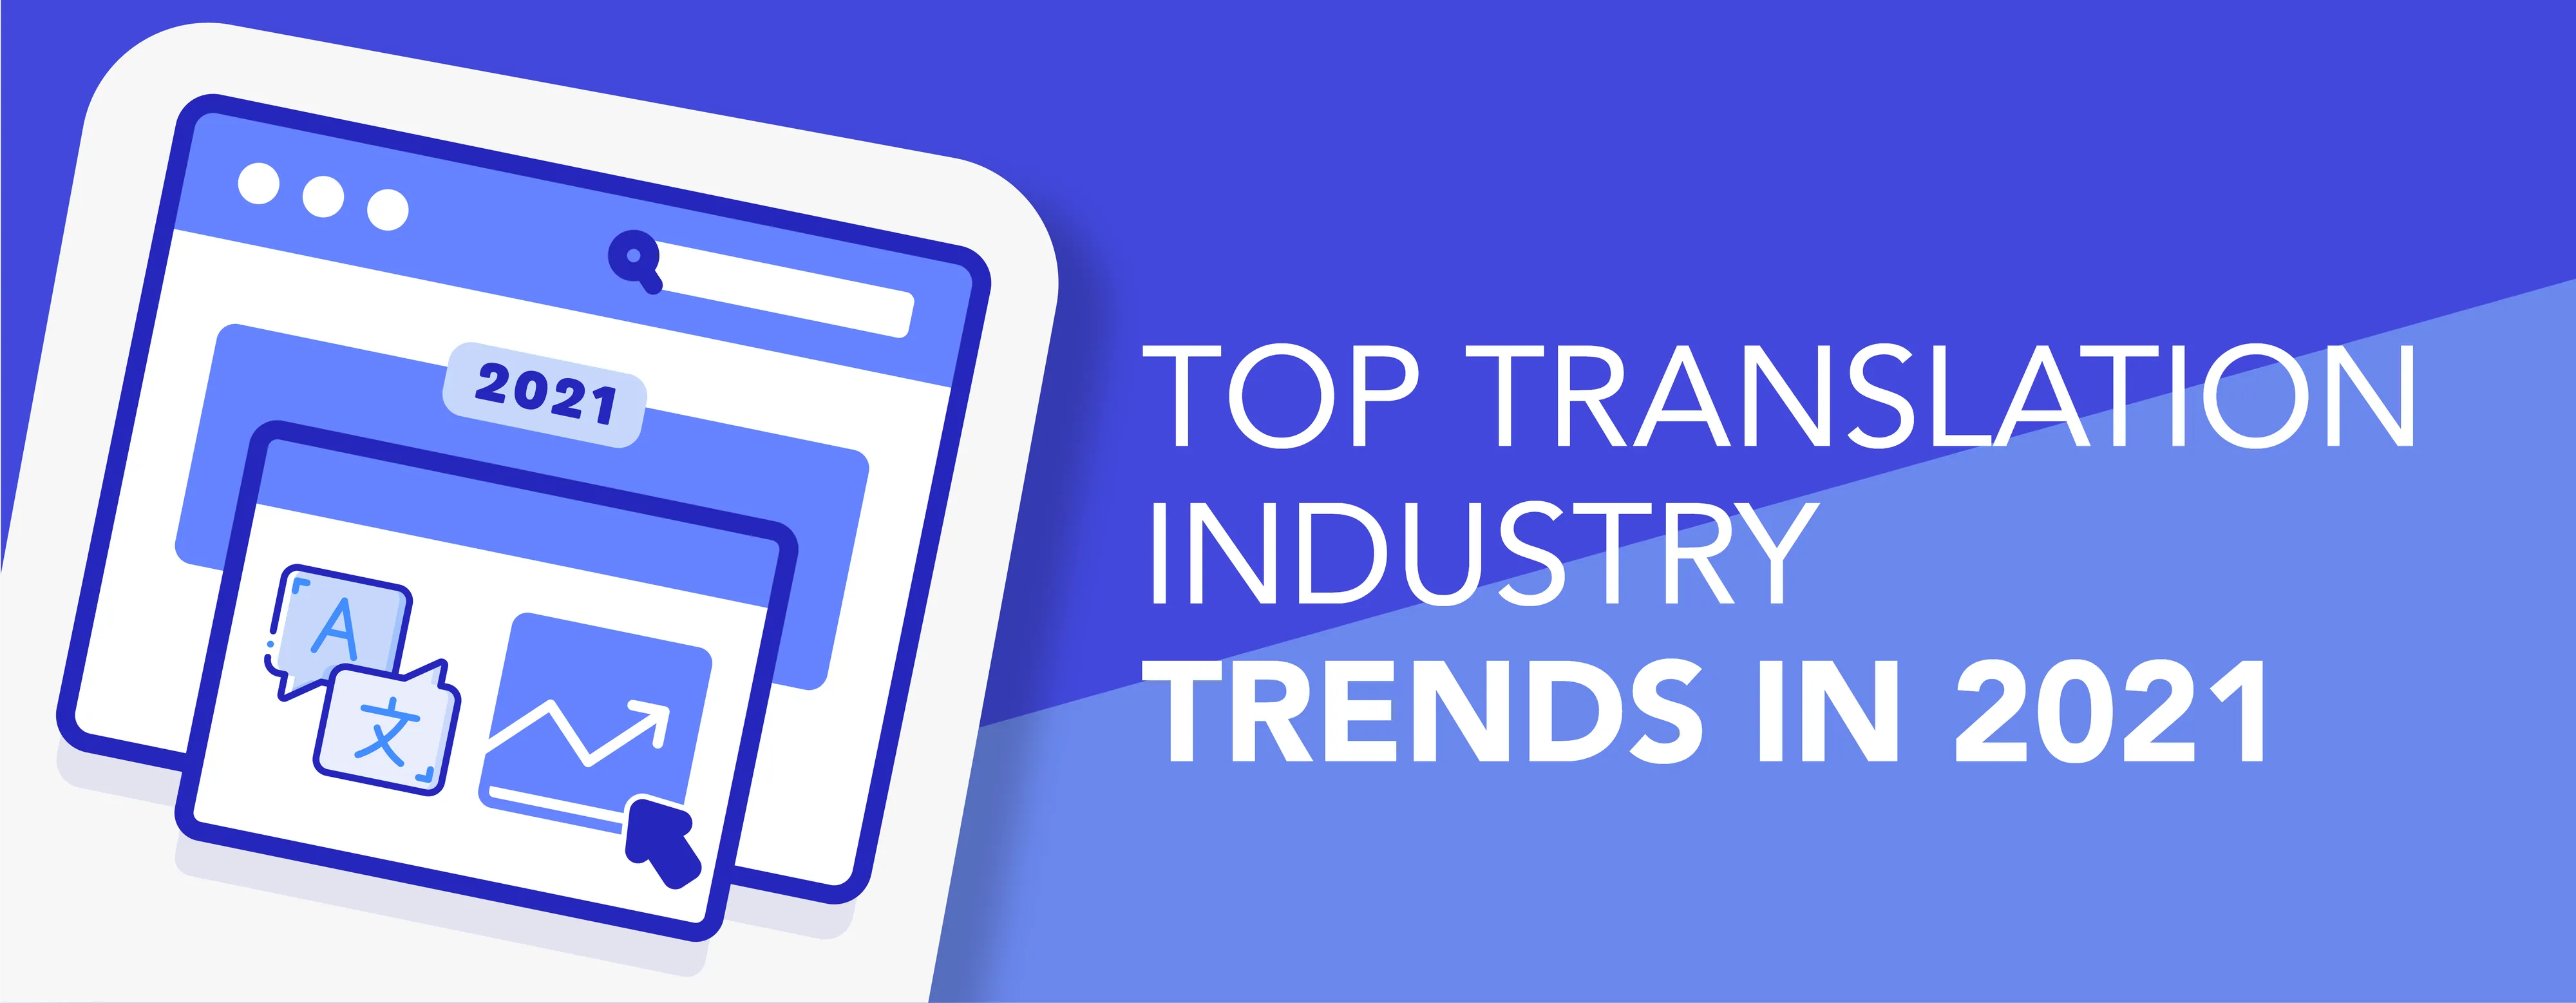 trends in the translation industry